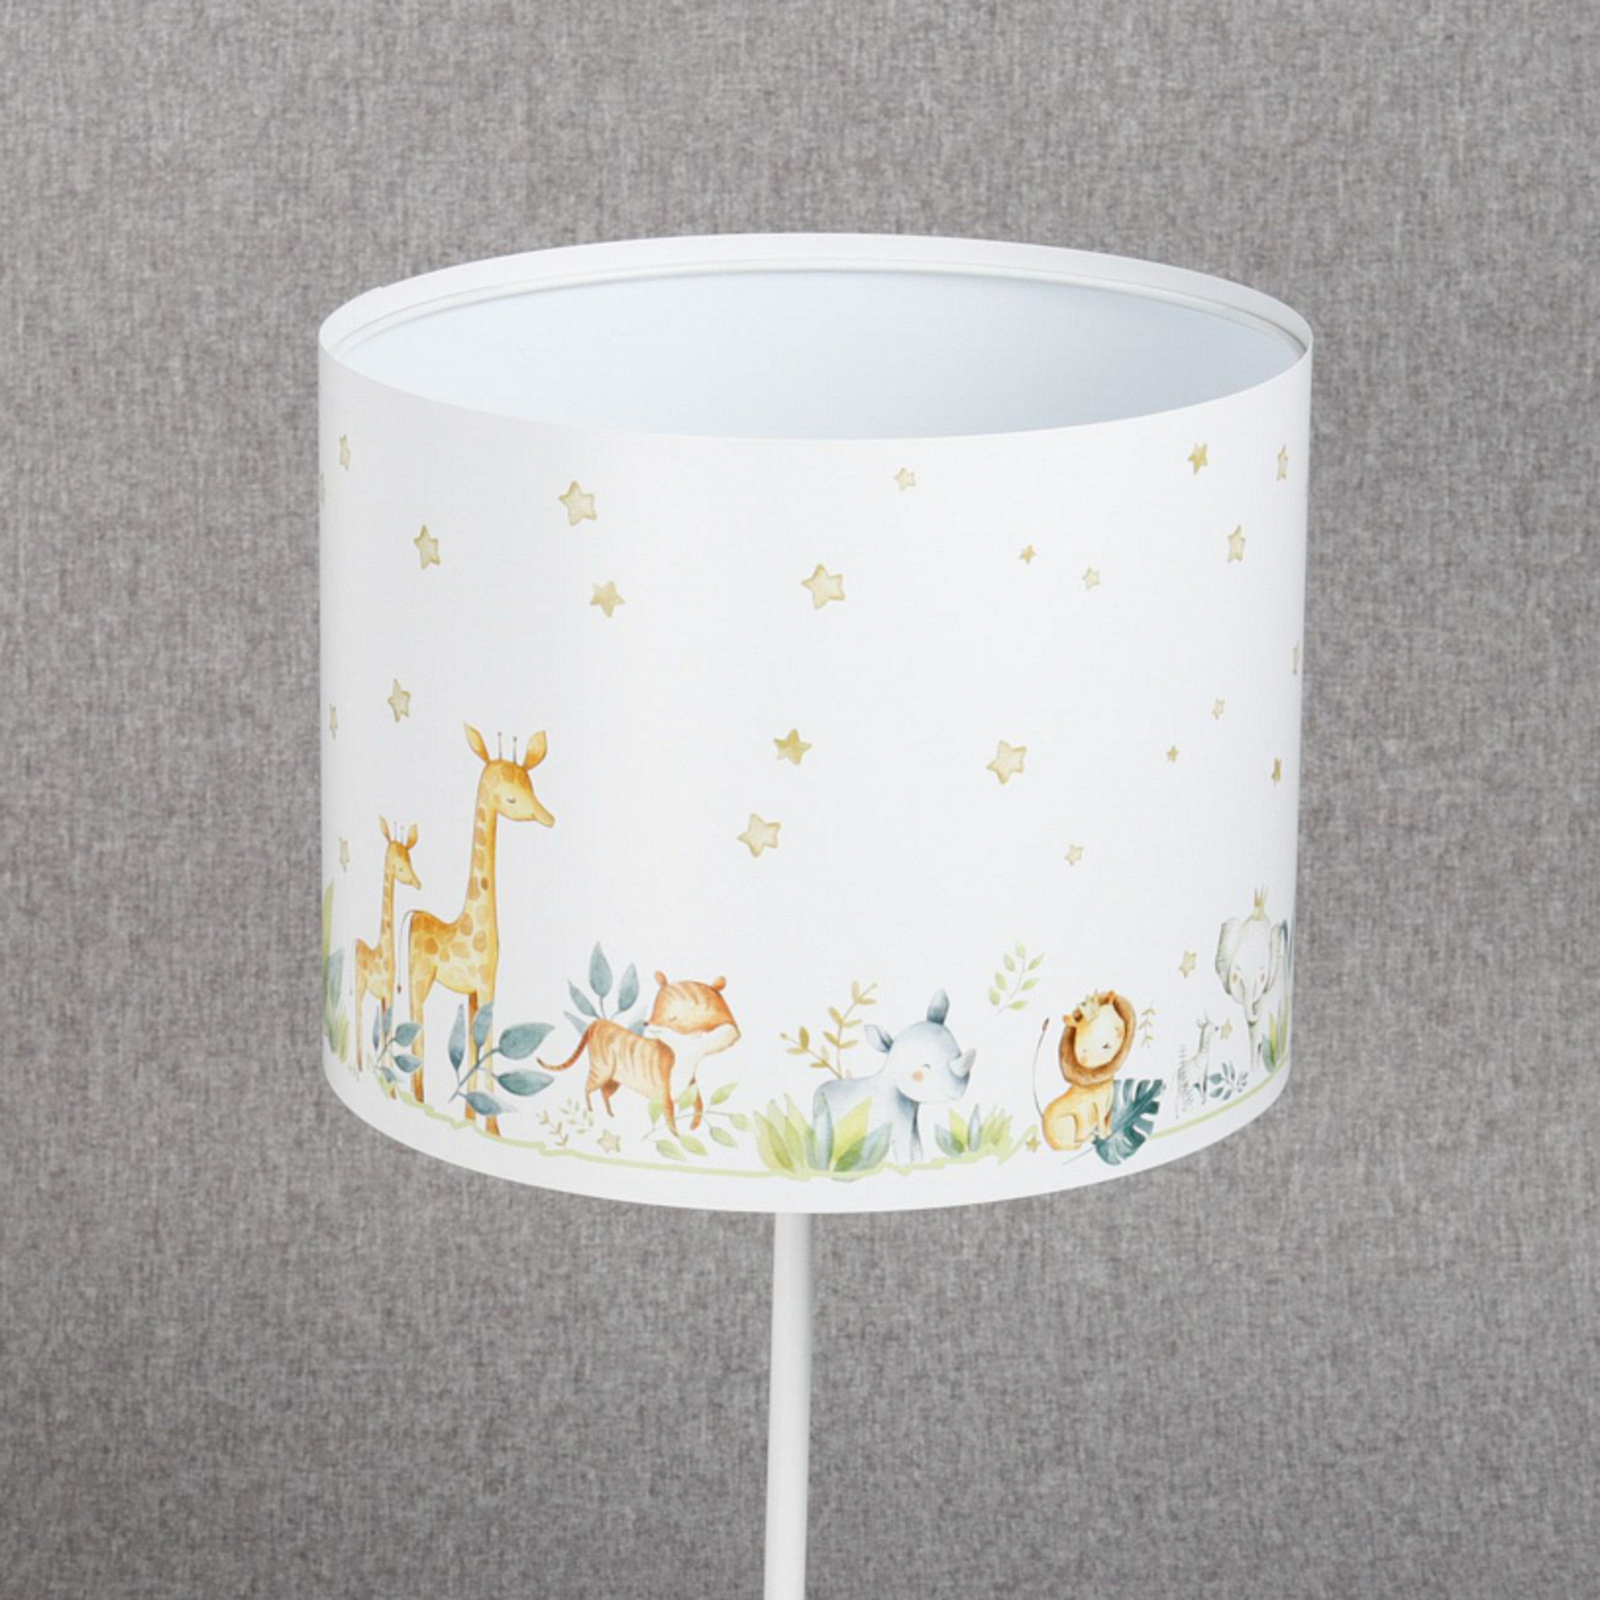 Max children's bedside table lamp